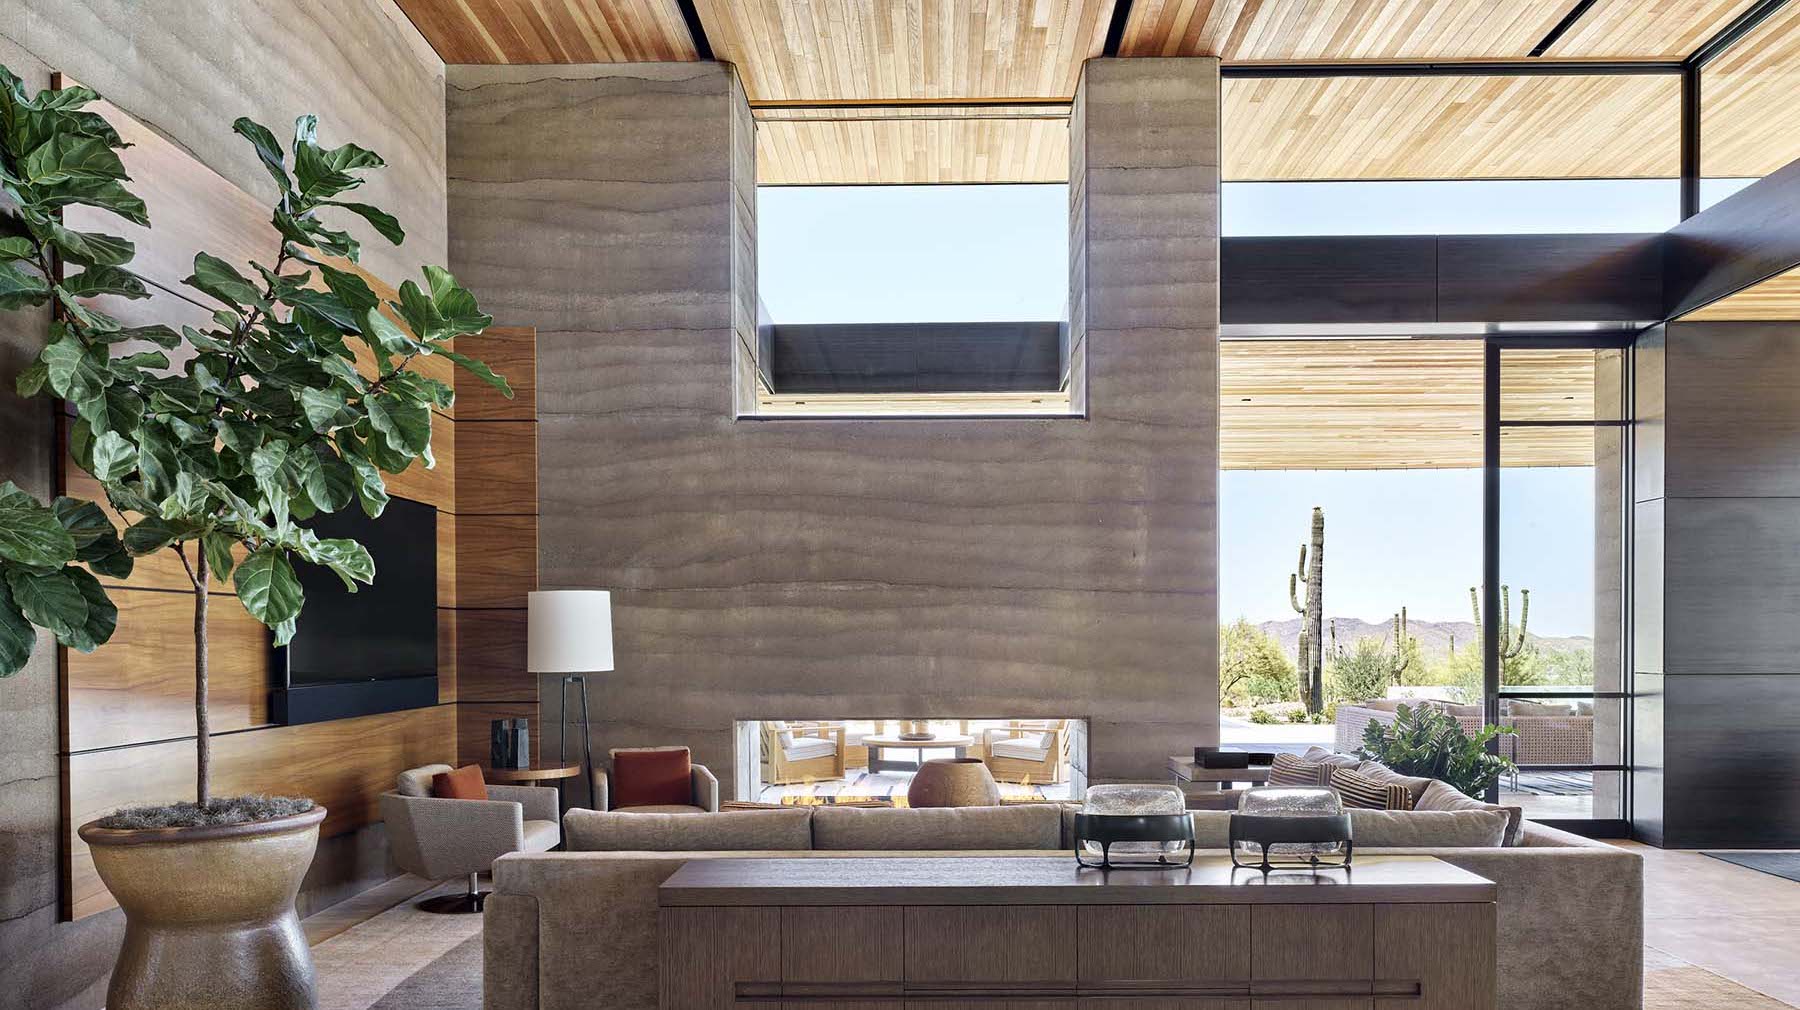 STRATA feature 2 Located in Scottsdale Ariz Drewett Works is an award winning architecture firm specializing in luxury residential hospitality and commercial architecture